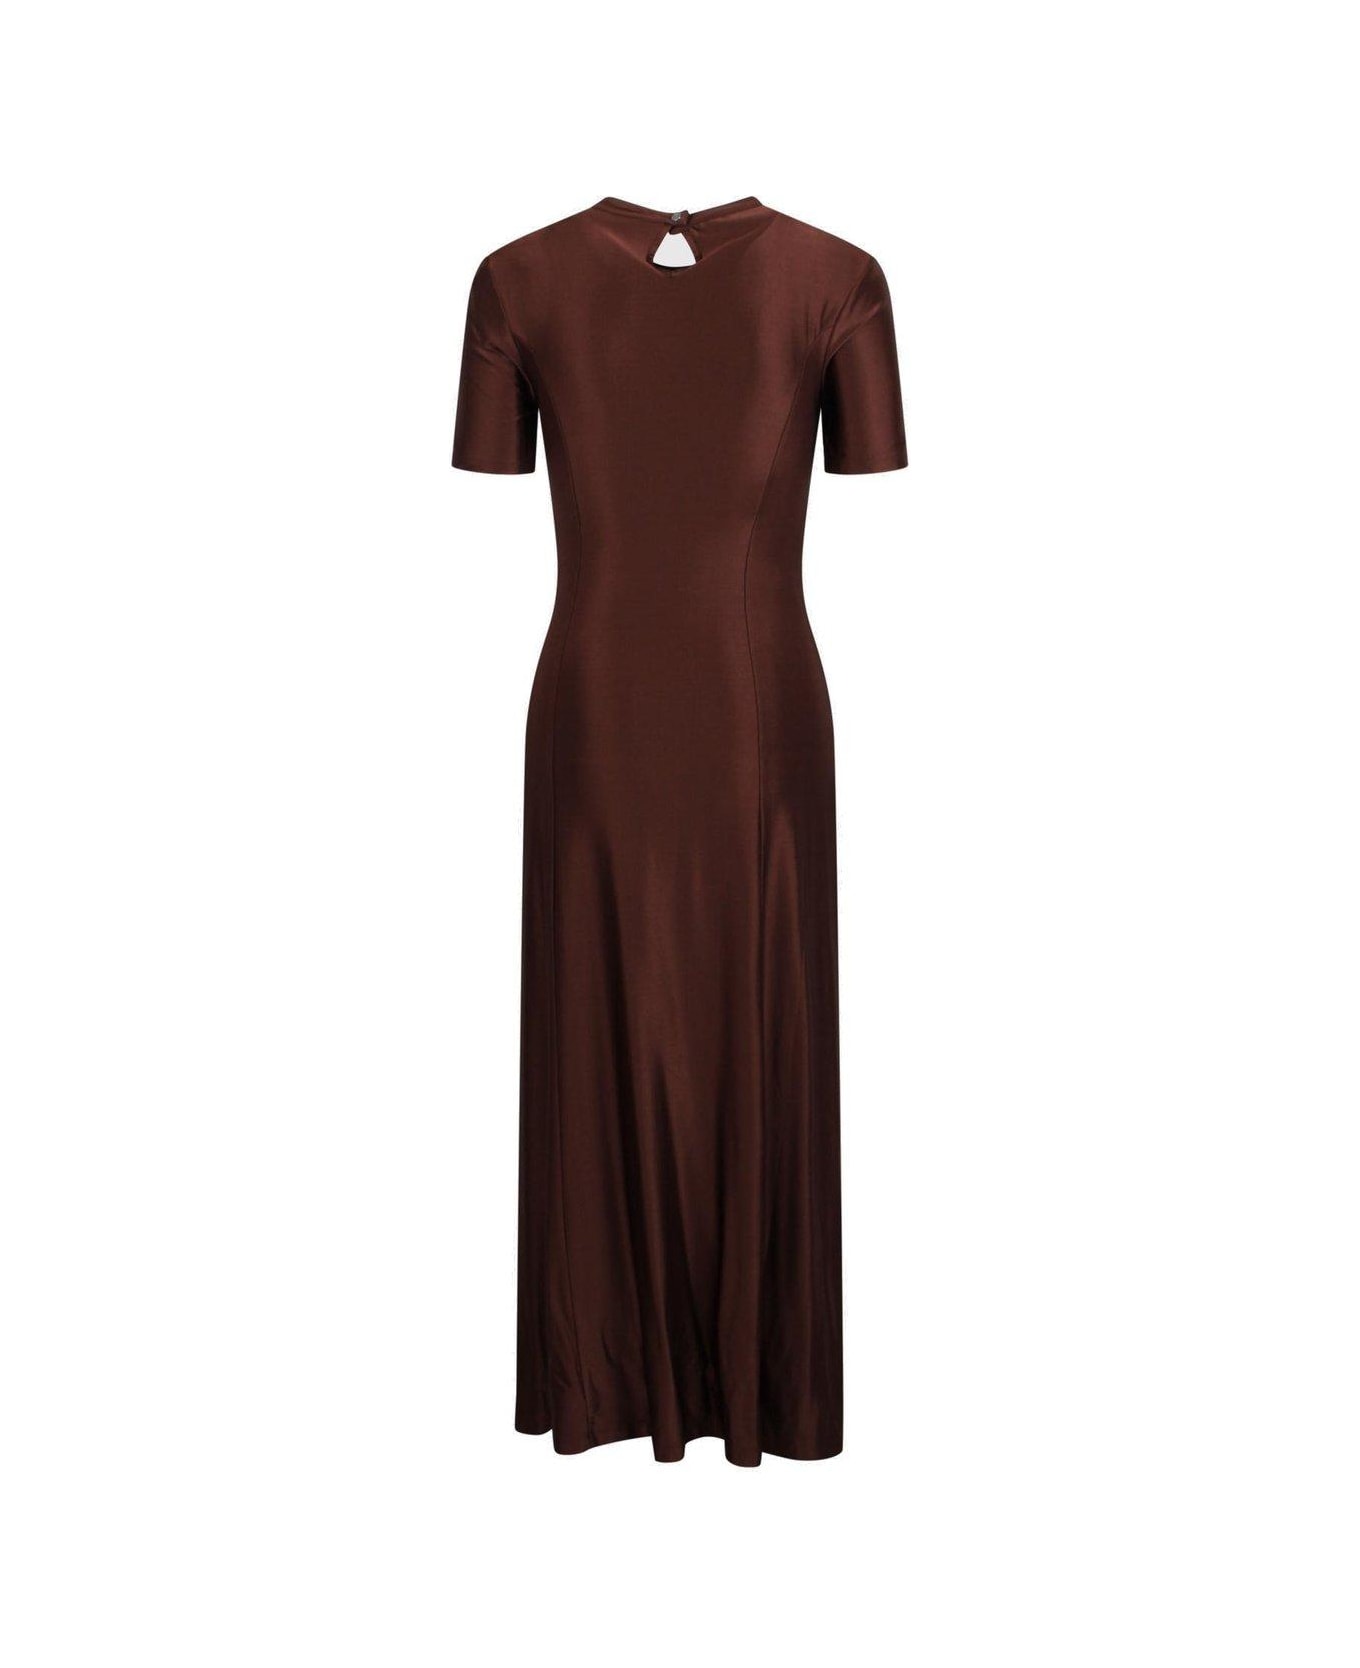 Paco Rabanne Ruched Detailed Midi Dress - Brown